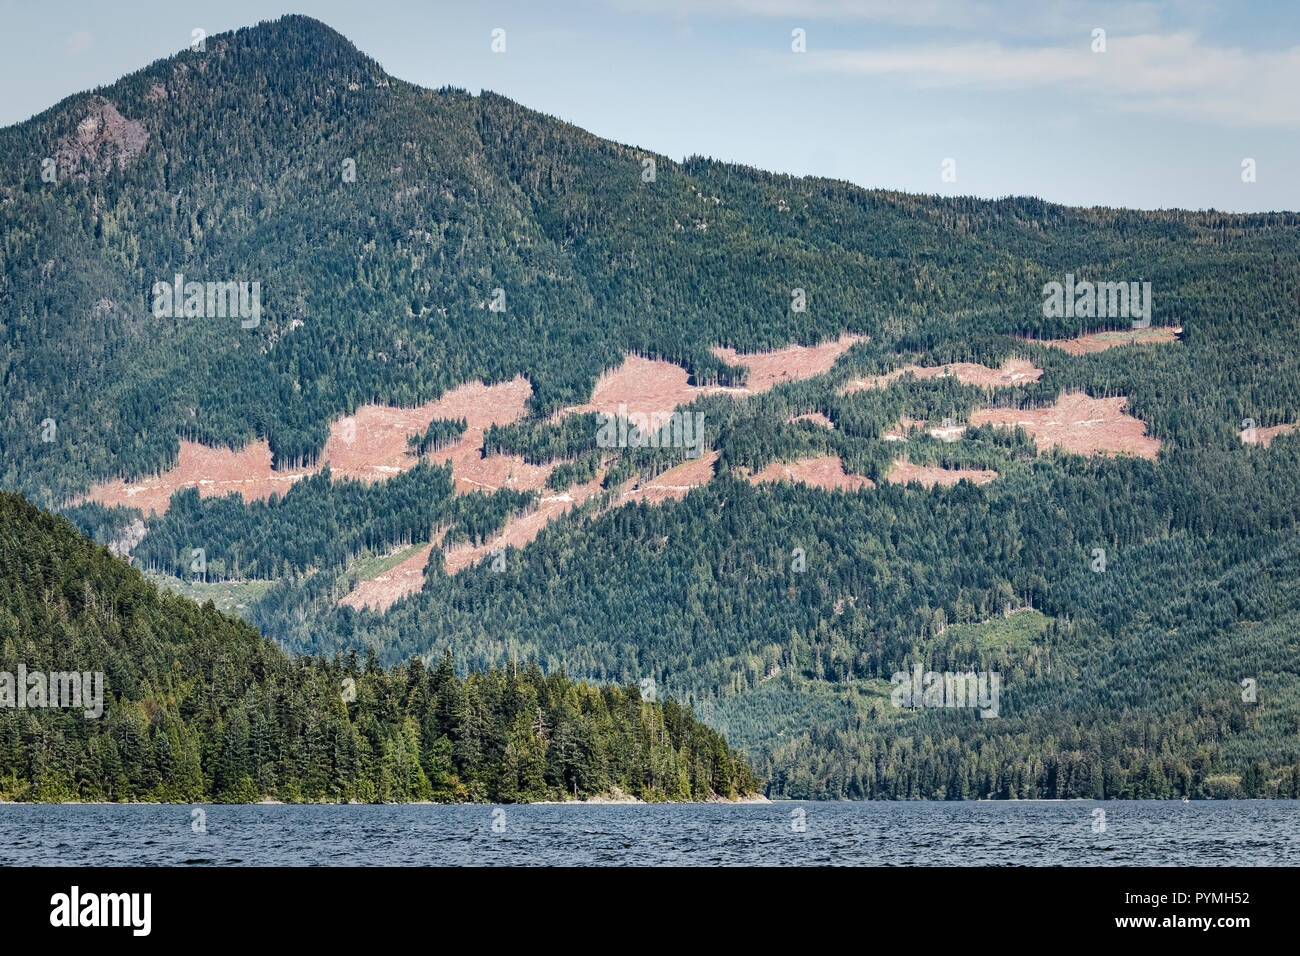 A large part of a steep mountainside in a coastal British Columbia inlet has been scarred by logging, leaving highly visible clearcut patches. Stock Photo